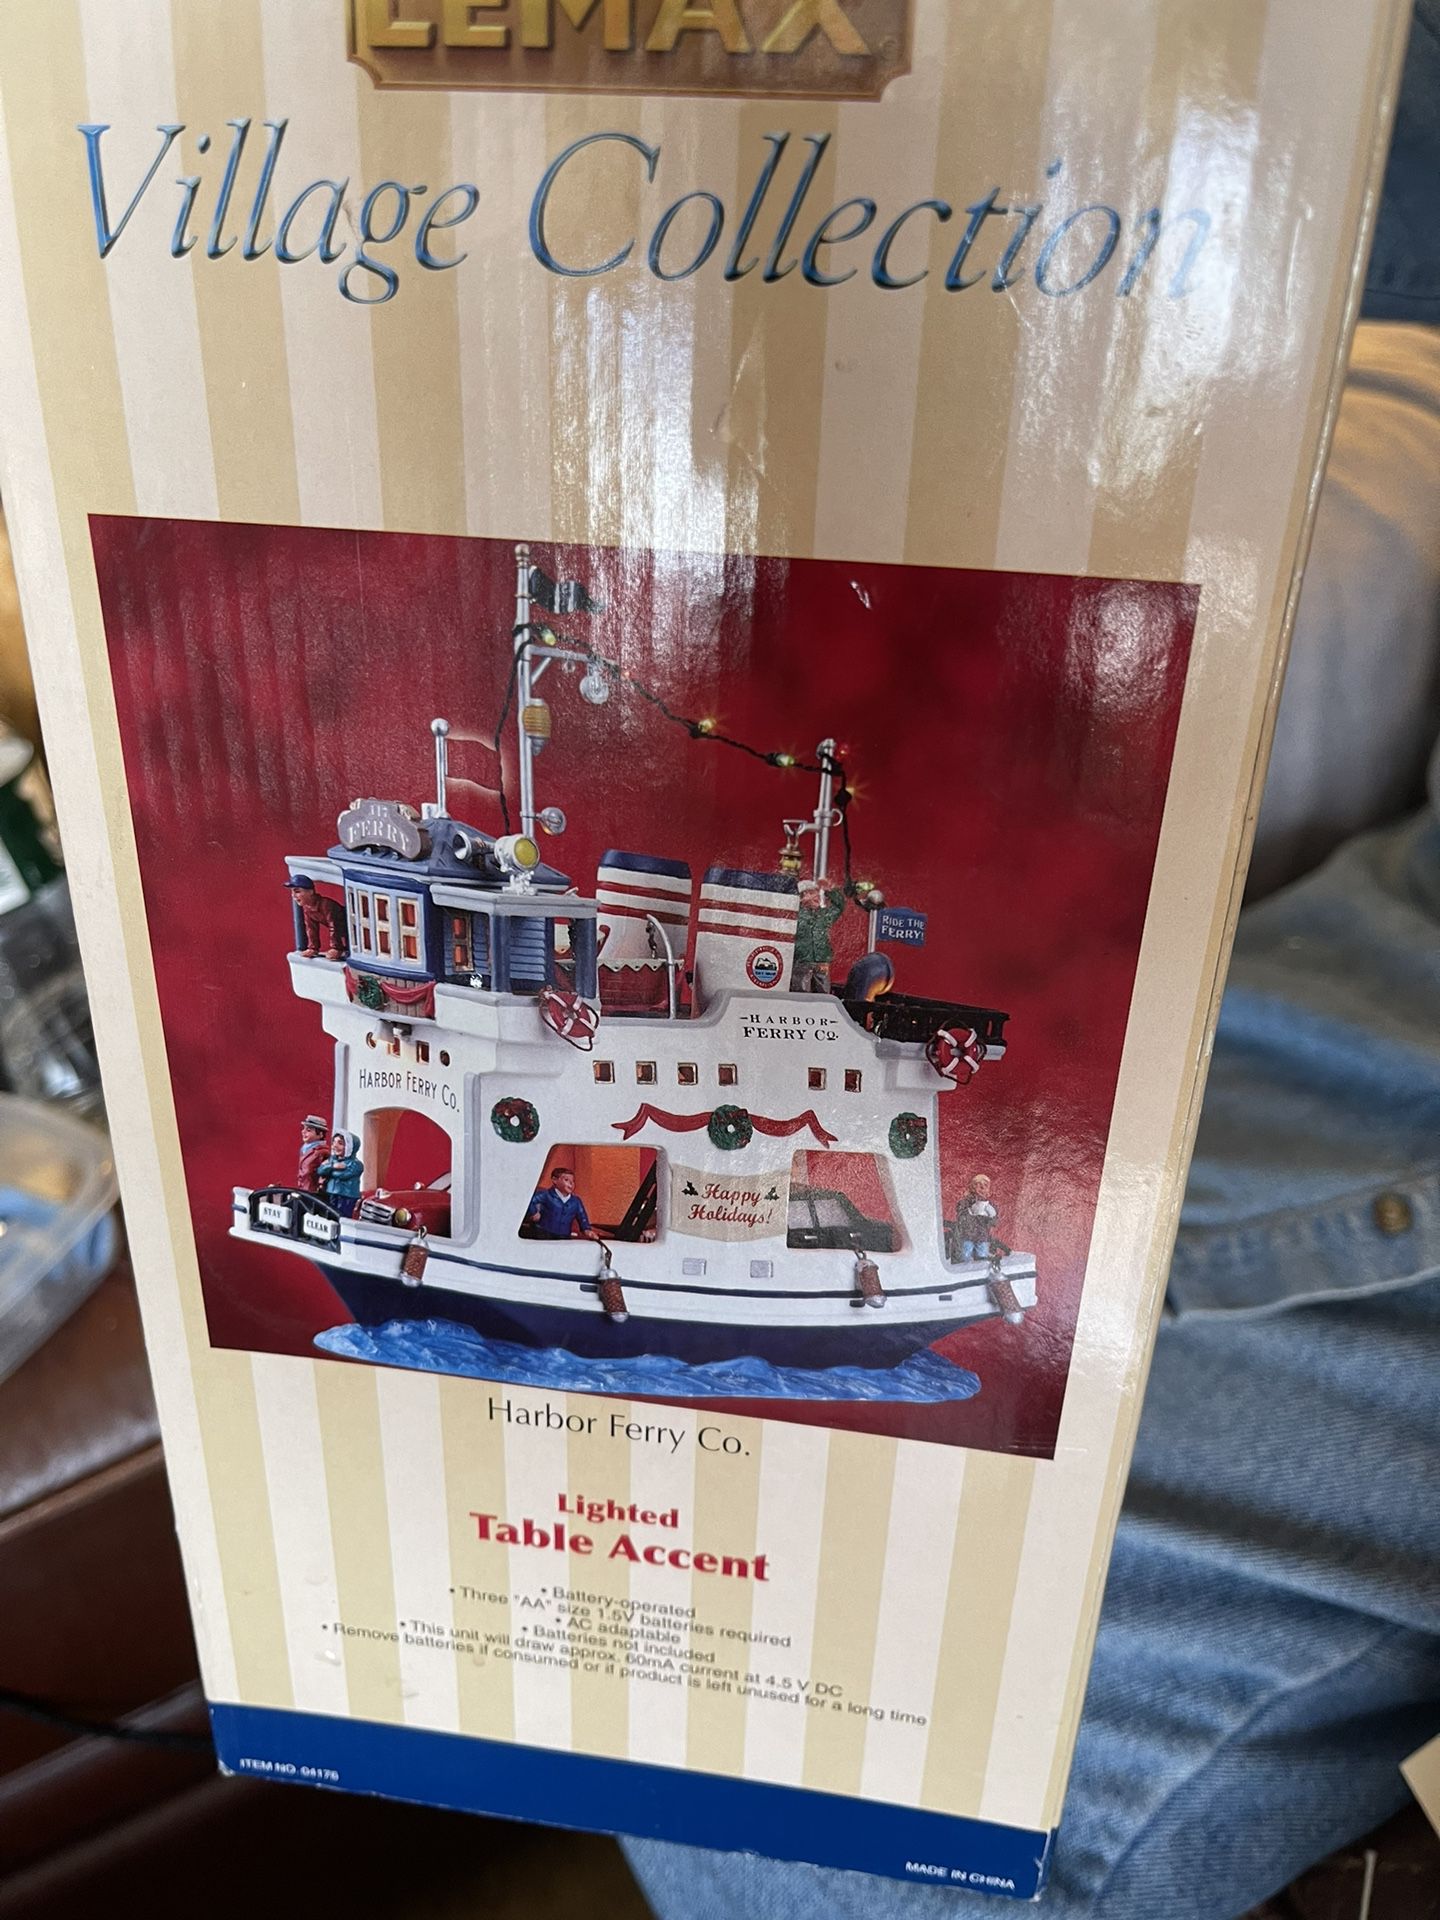 Le max Village Collection  Ferry boat Collectible  8 Lbs